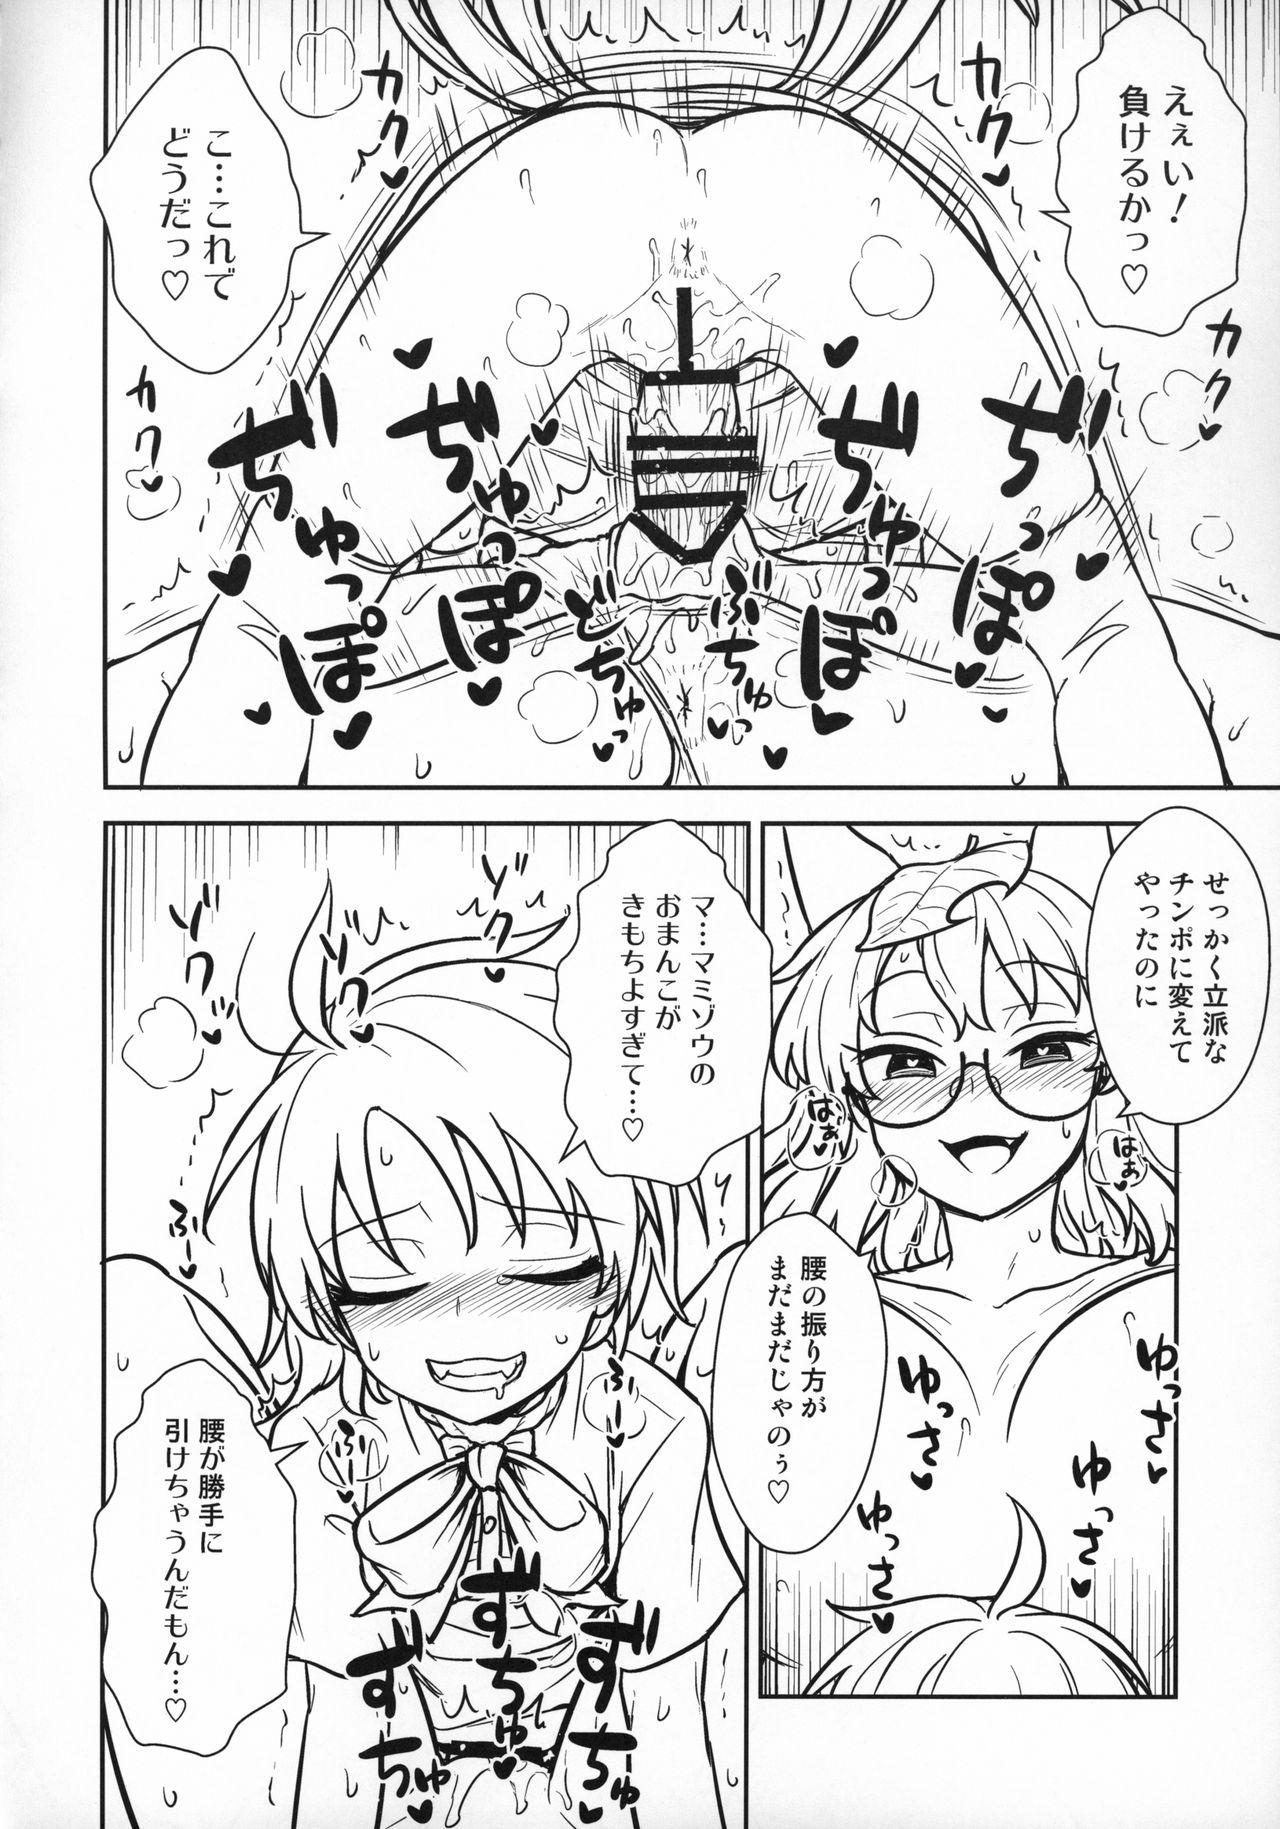 Stud (C96) [110-GROOVE (Itou Yuuji)] Nue-chan vs Mamizou-san (Touhou Project) - Touhou project Office Sex - Page 11